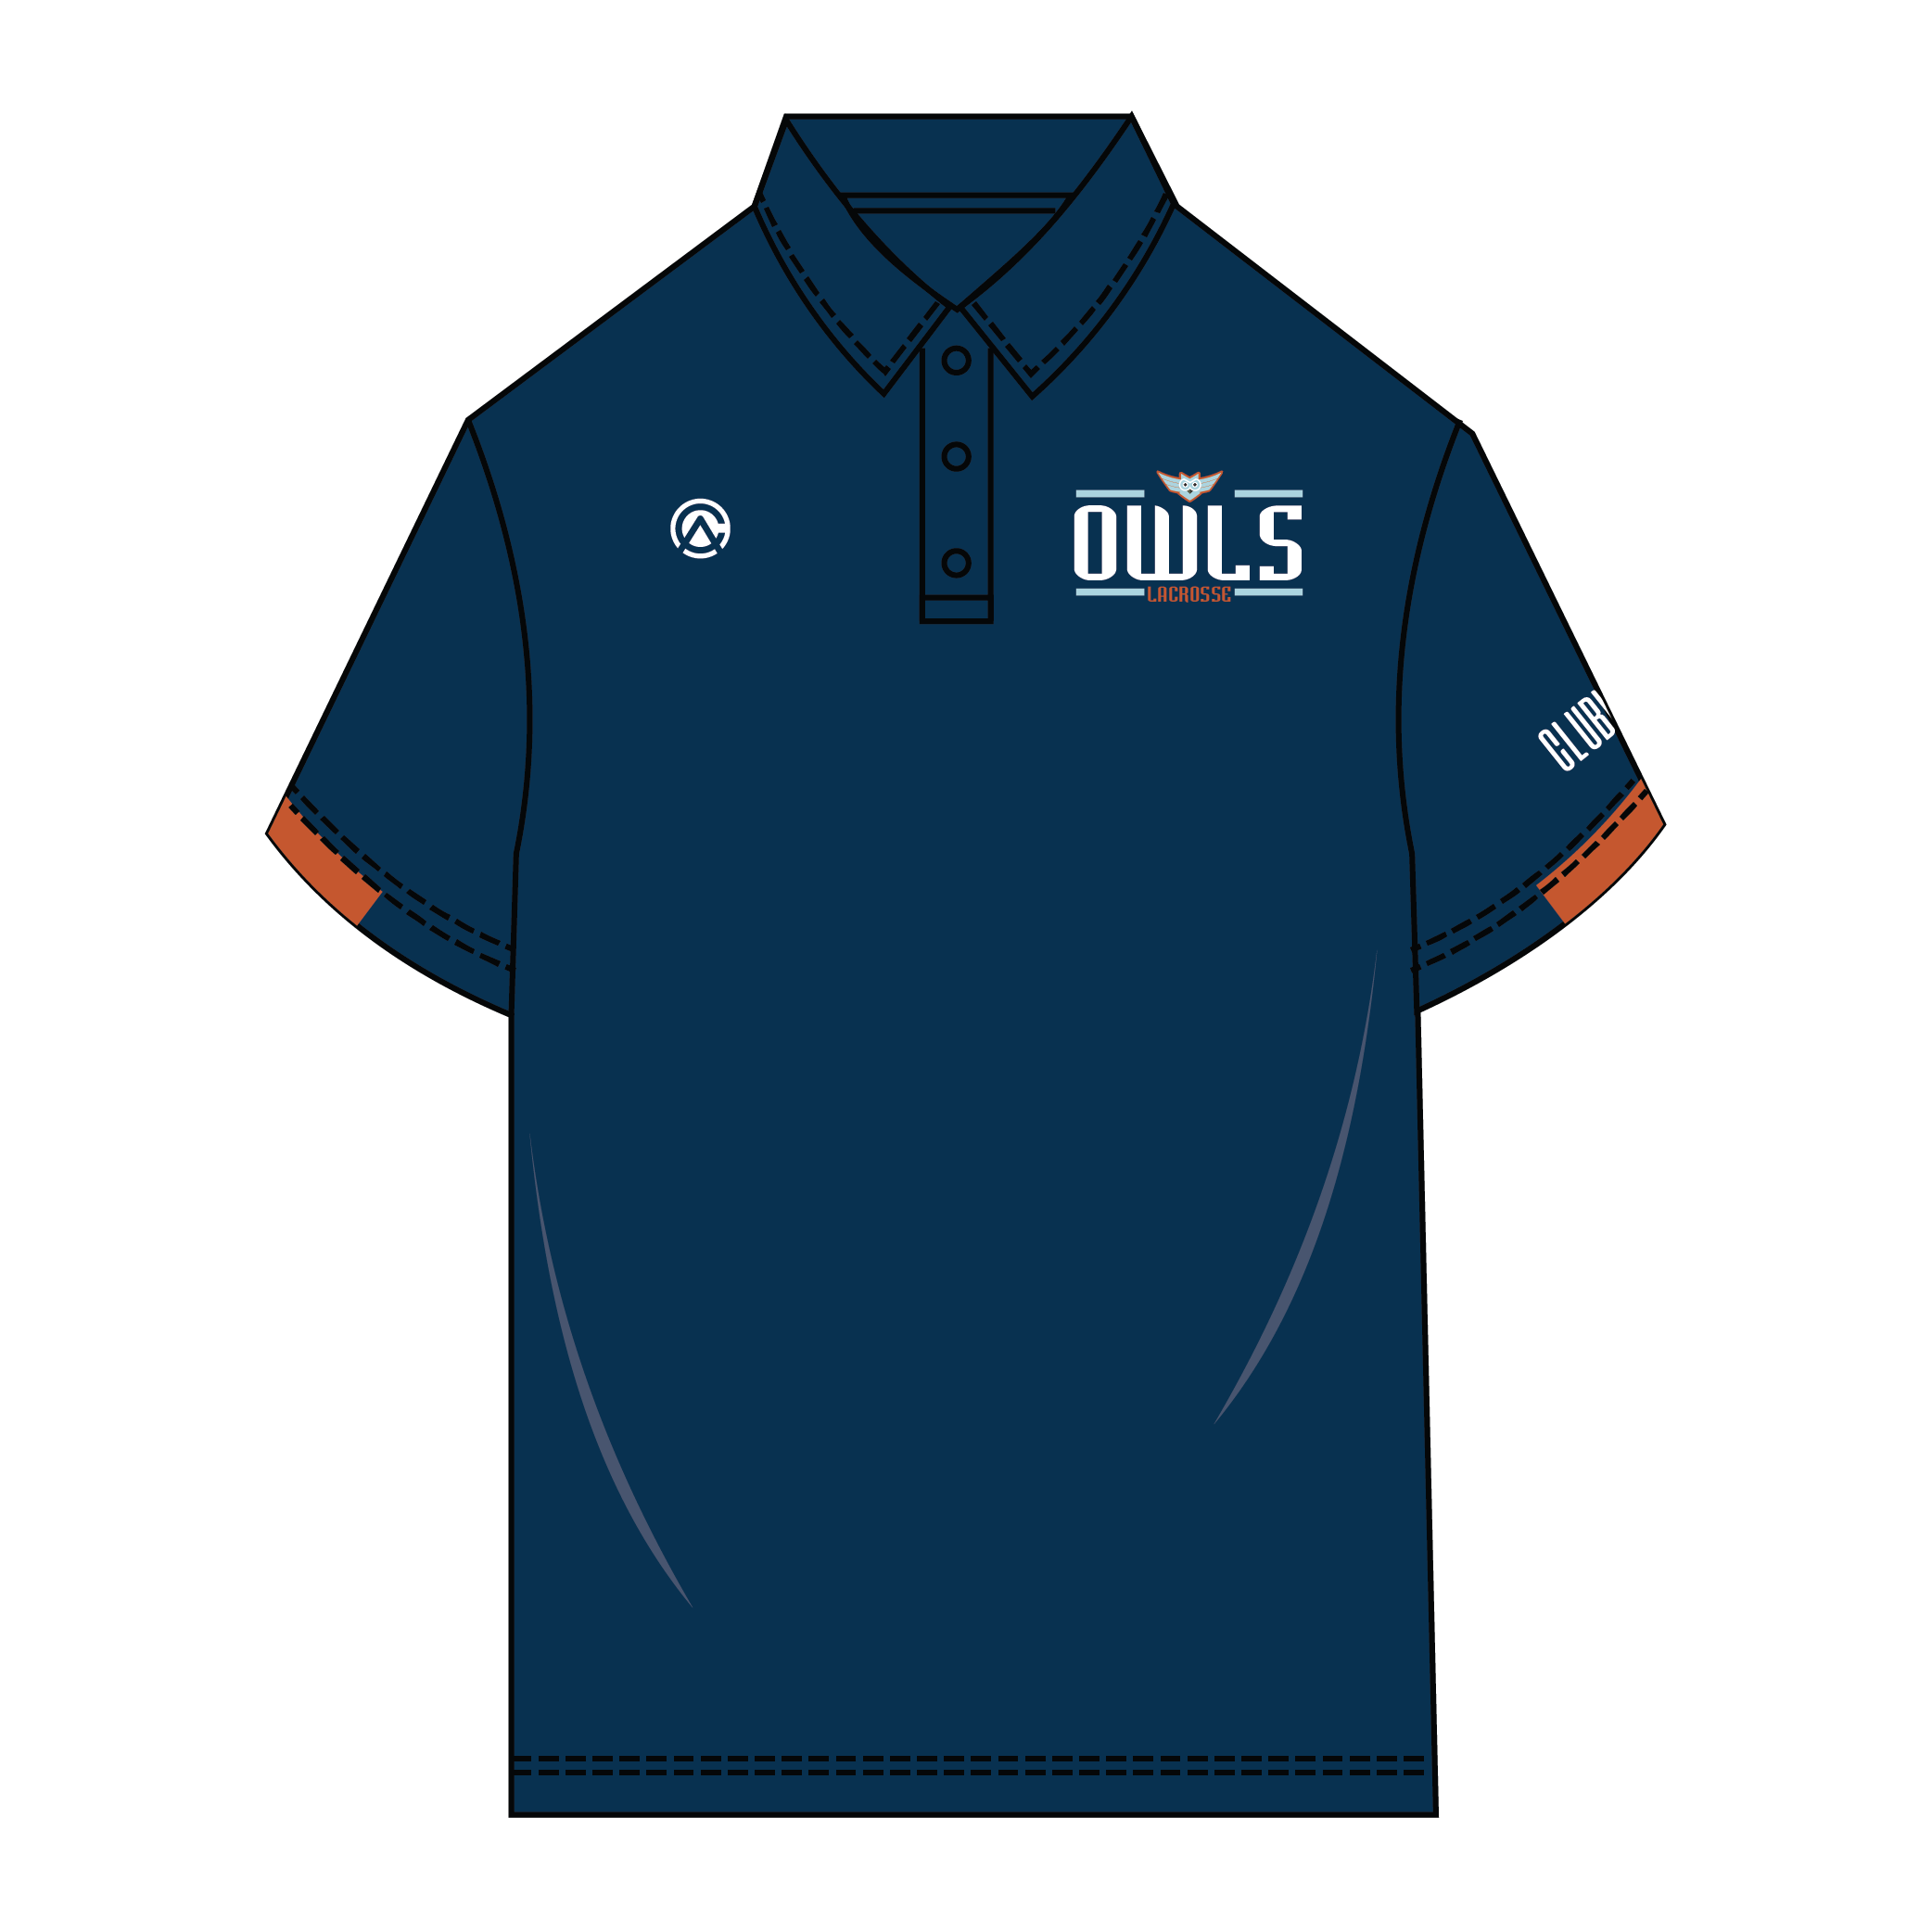 Clubhouse Original: Team-Play Travel Polo